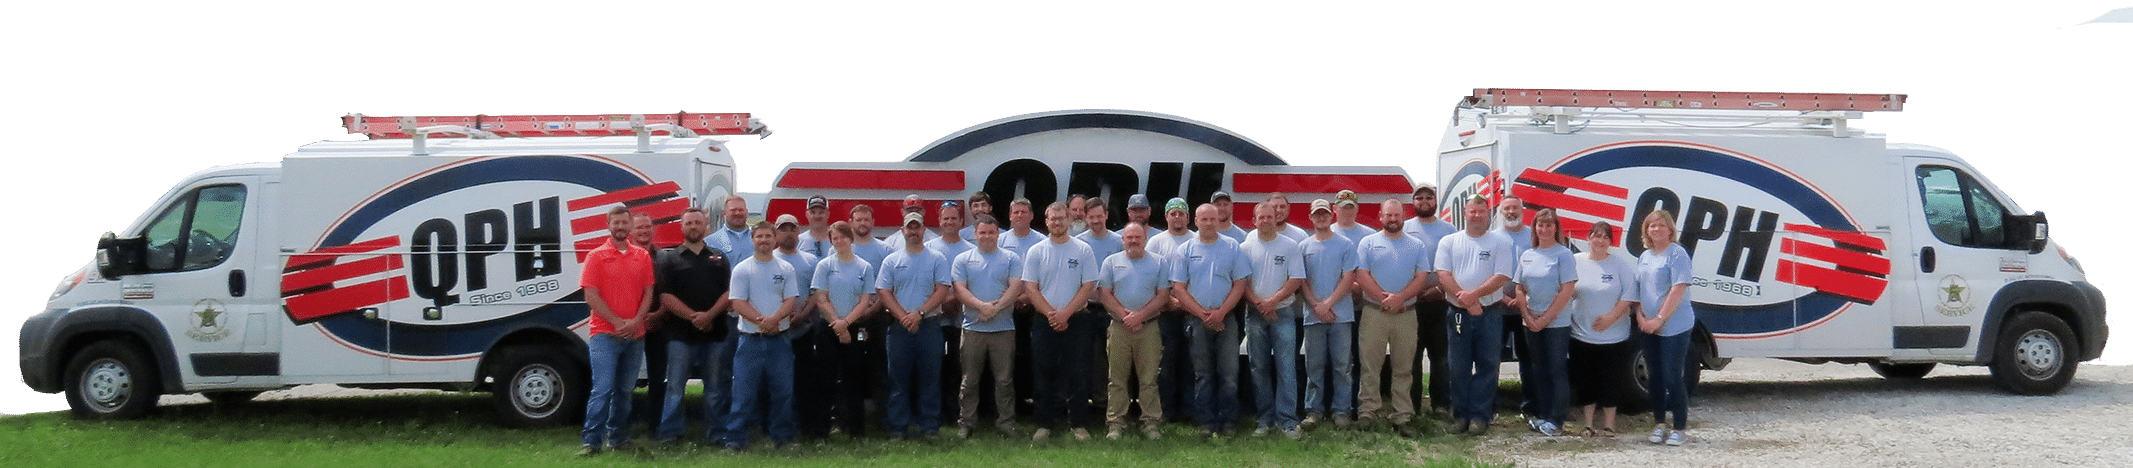 QPH Commercial Piping Team Photo